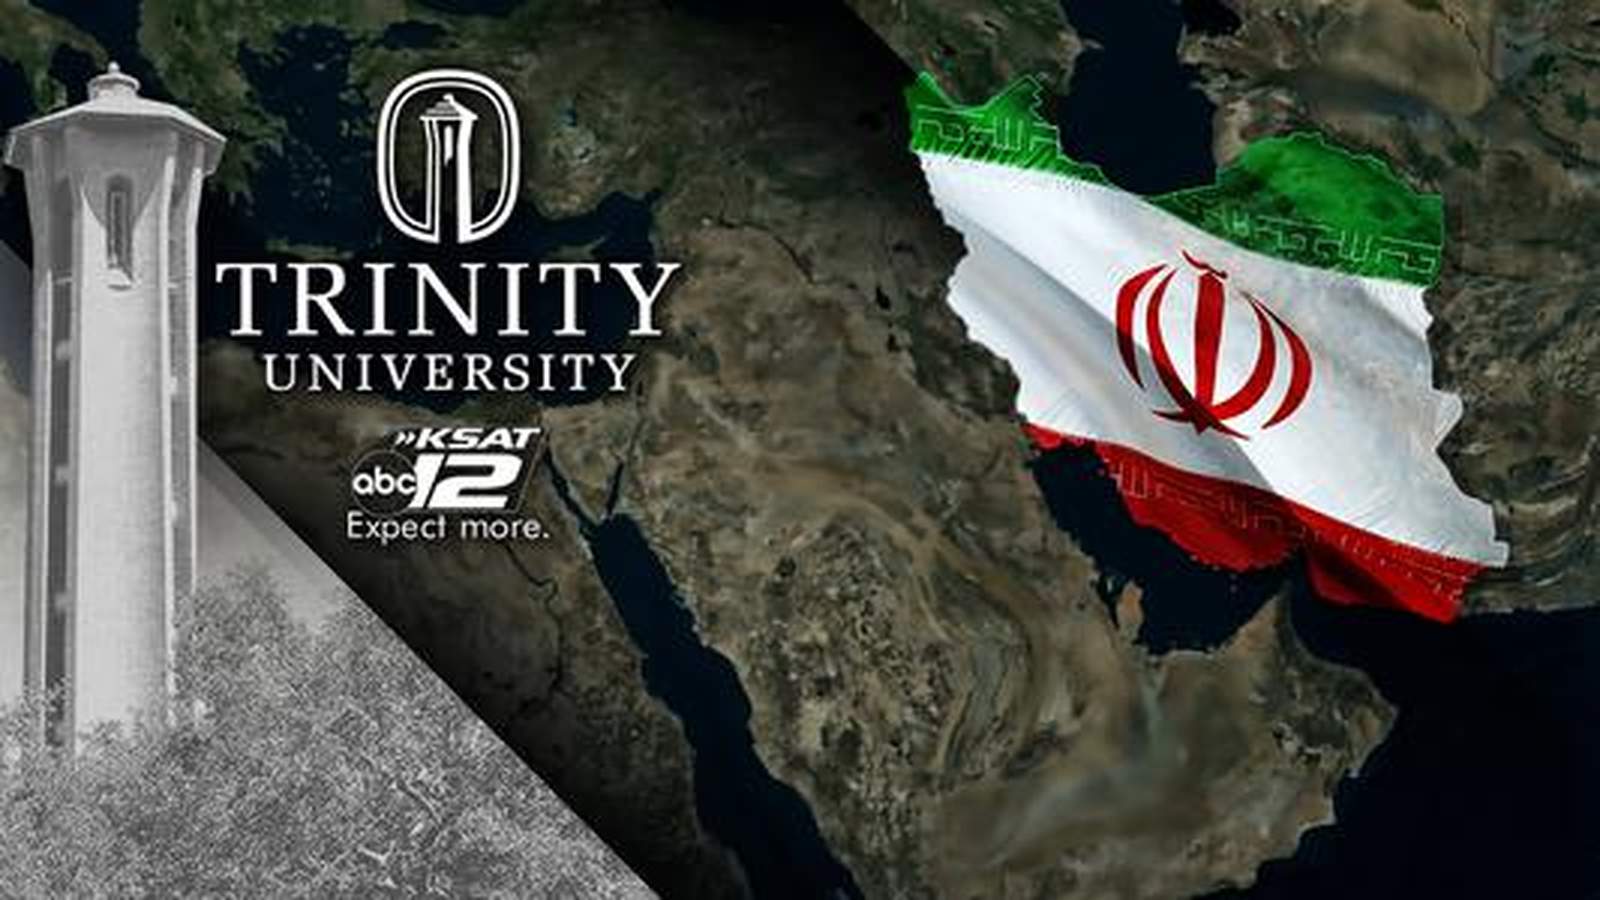 Video: Steve Spriester, Trinity professor answer your questions about US-Iran conflict